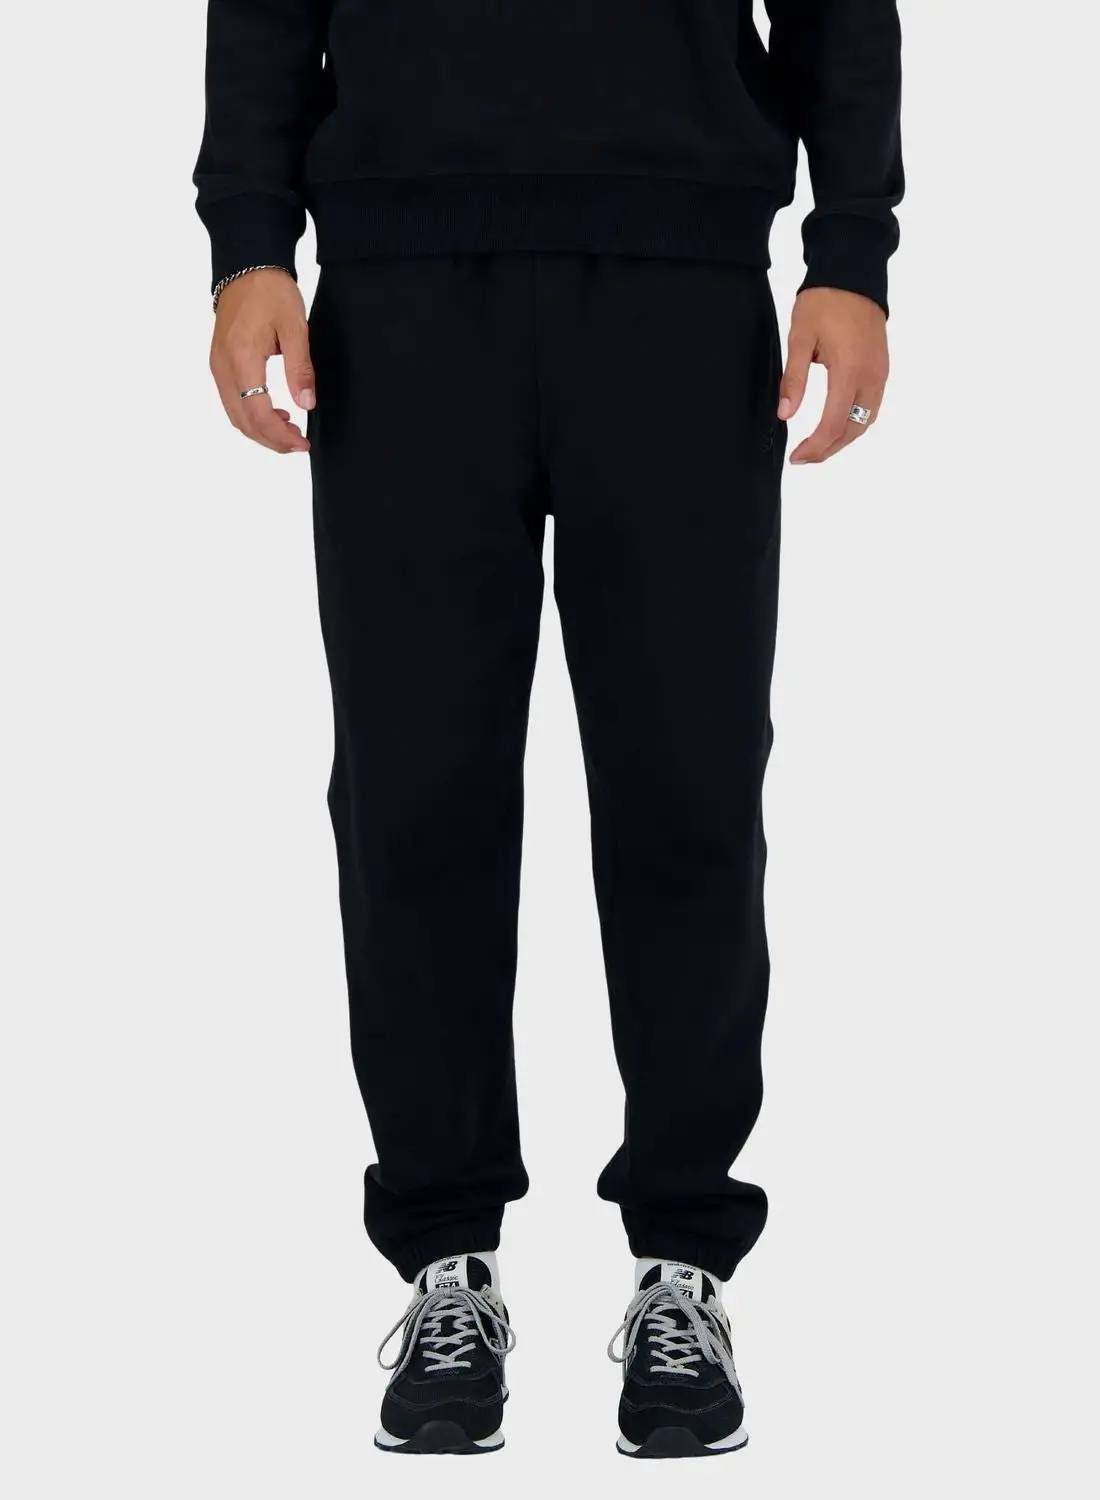 New Balance Essential French Terry Athletics Sweatpants